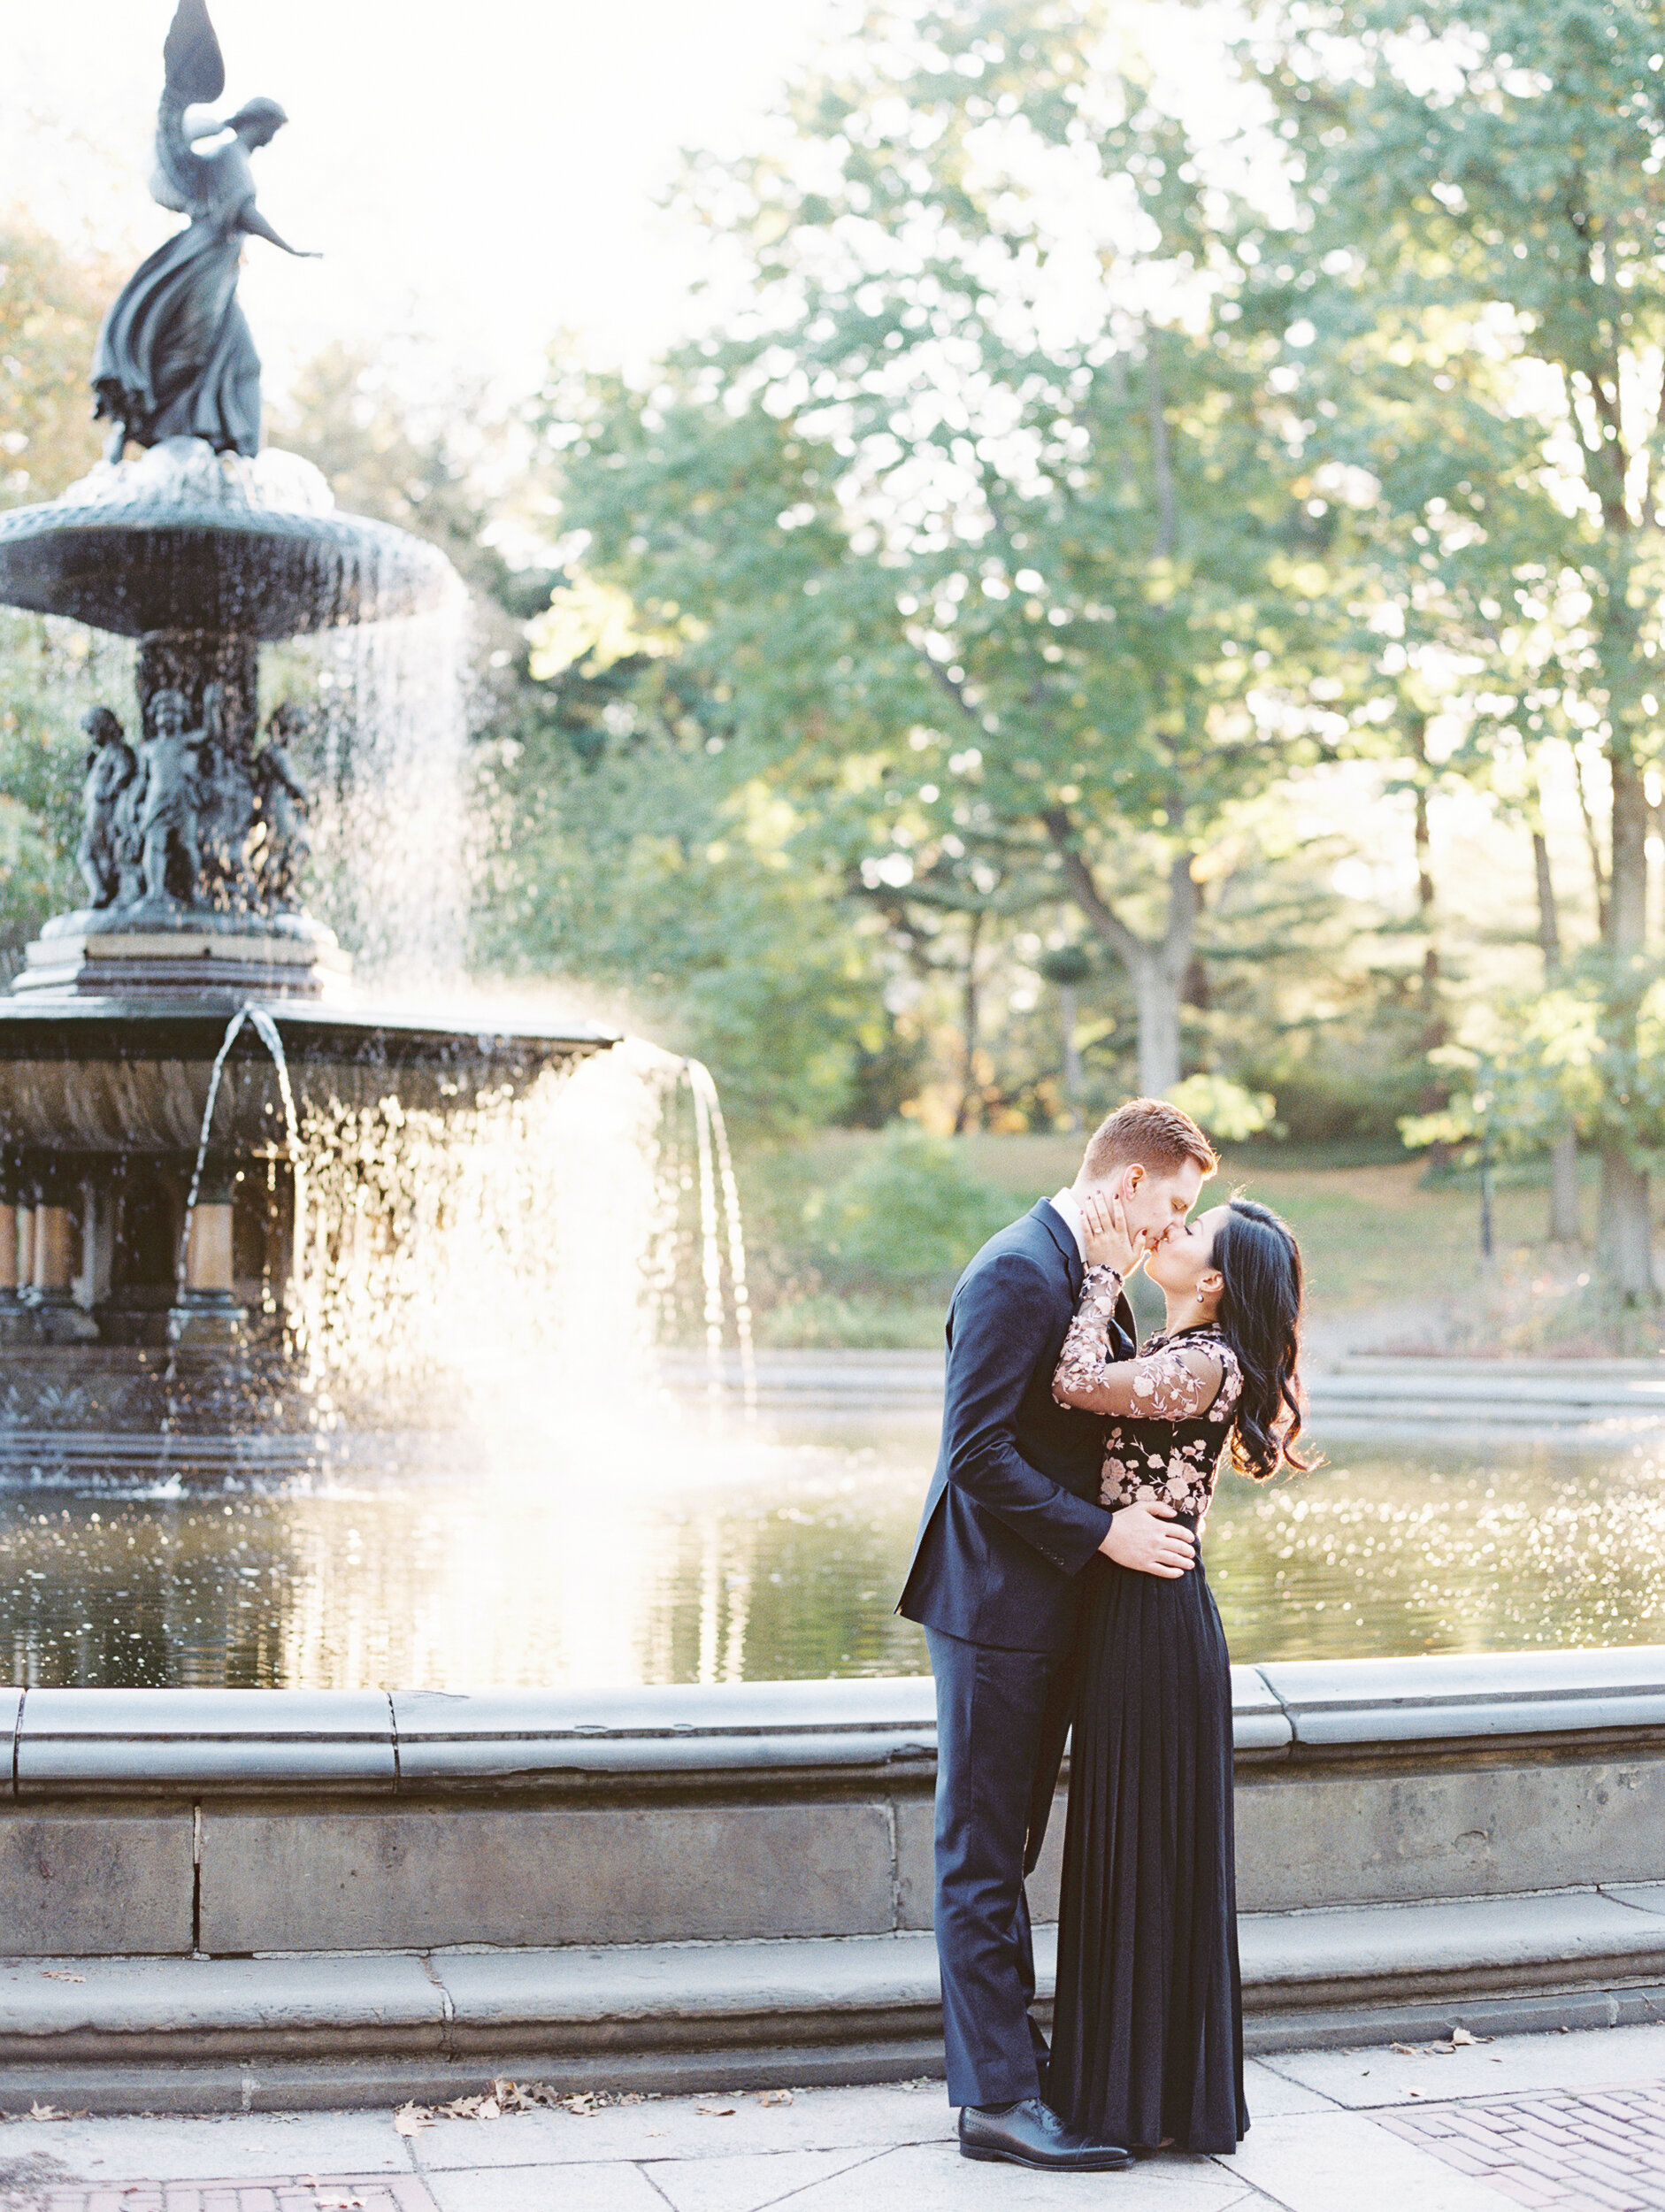 Kissing in Front of Bethesda Fountain in Central Park, NYC